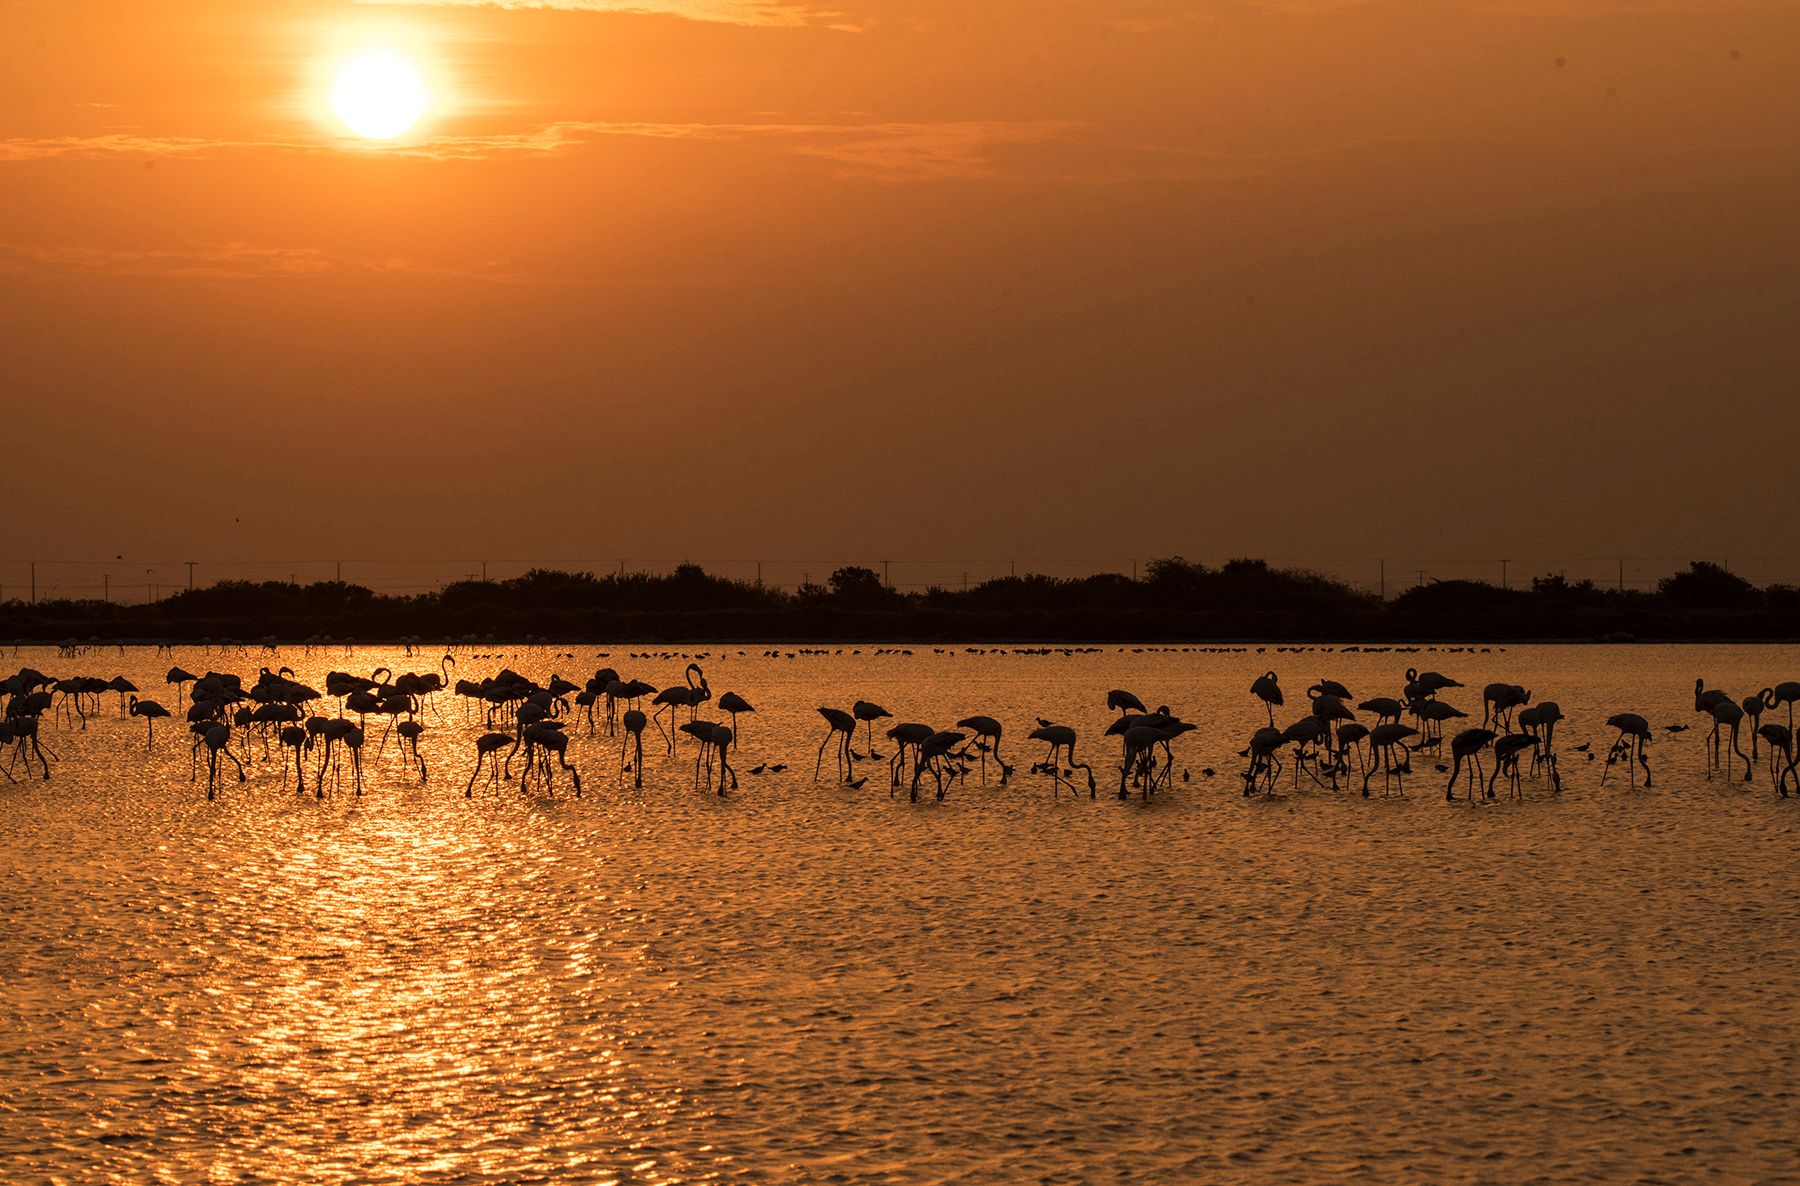 Flamingoes in the Vankalai sanctuary in Mannar, Sri Lanka, during the sunset.